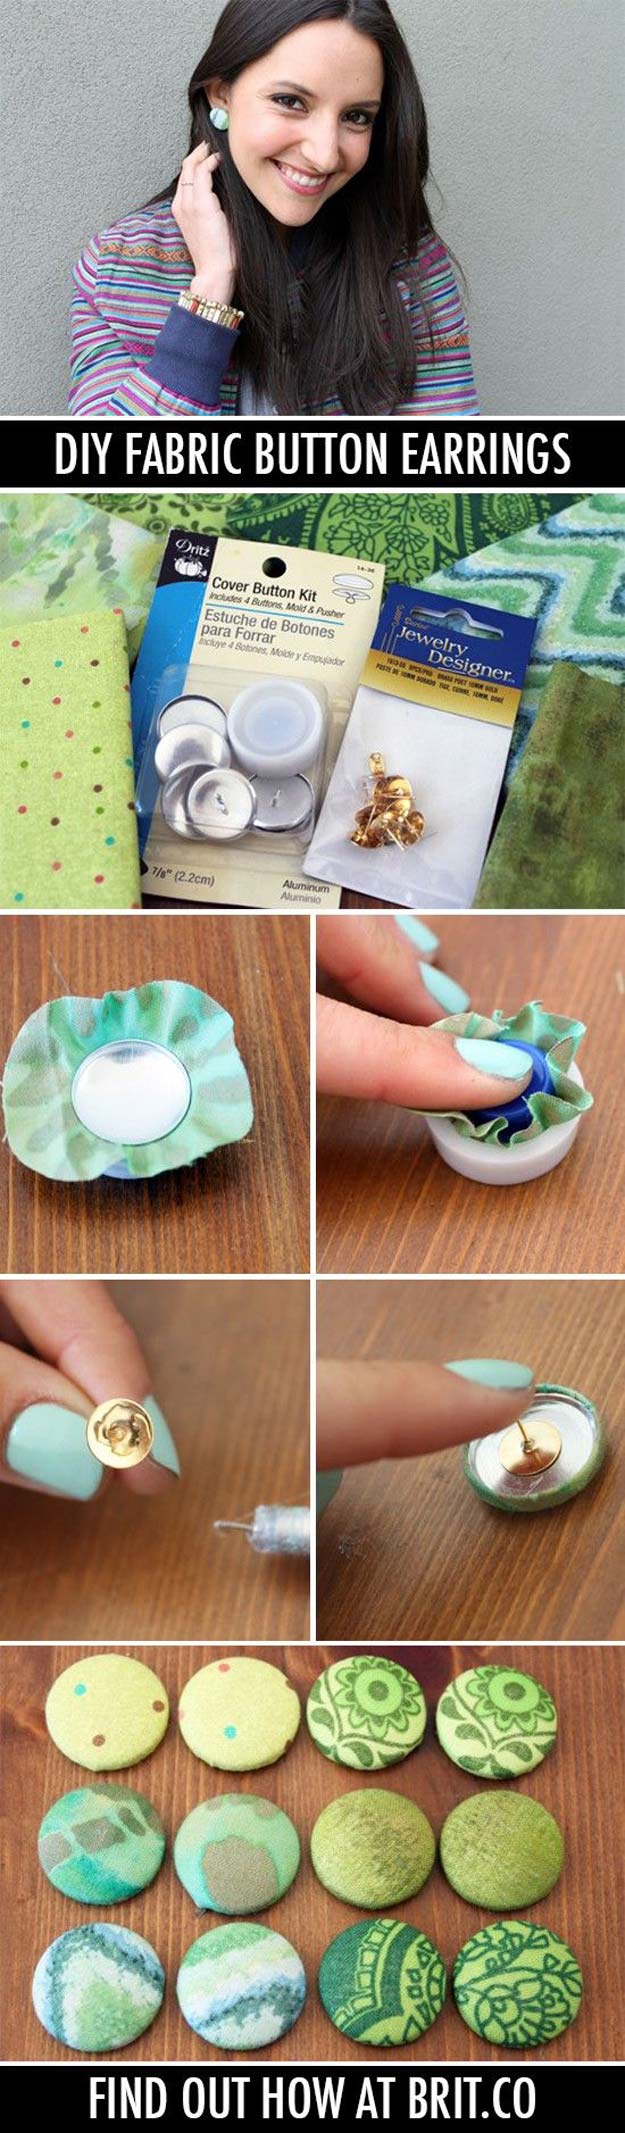 DIY Earrings and Homemade Jewelry Projects - Fabric Button Earrings - Easy Studs, Ideas with Beads, Dangle Earring Tutorials, Wire, Feather, Simple Boho, Handmade Earring Cuff, Hoops and Cute Ideas for Teens and Adults #diygifts #diyteens #teengifts #teencrafts #diyearrings